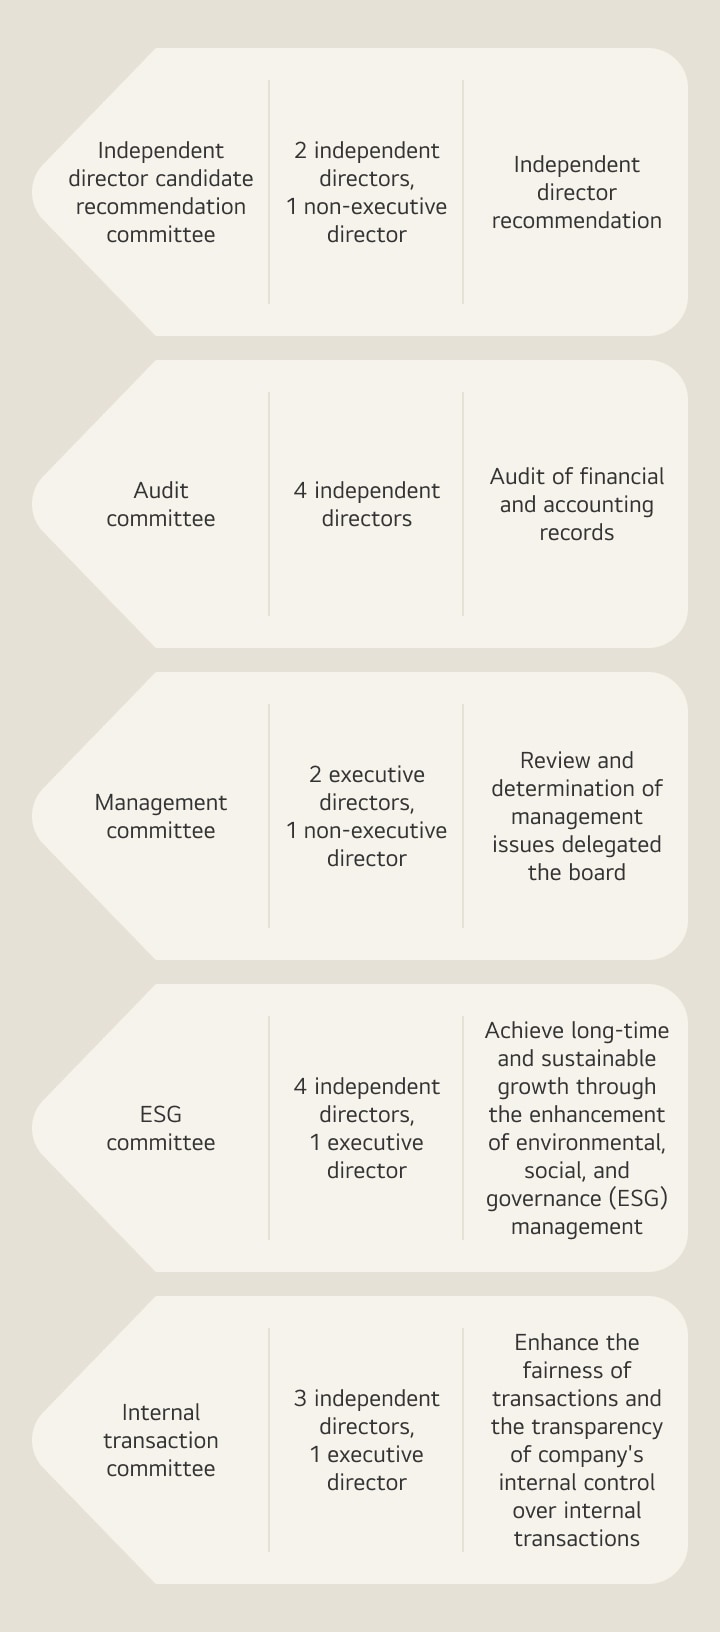 Board of directors Description image Independent director candidate recommendation committee / 2 independent directors, 1 non-executive director Audit committee / 4 independent directors Management committee / 2 executive directors, 1 non-executive director ESG committee / 4 independent directors, 1 executive director Internal transaction committee / 3 independent directors, 1 executive director 